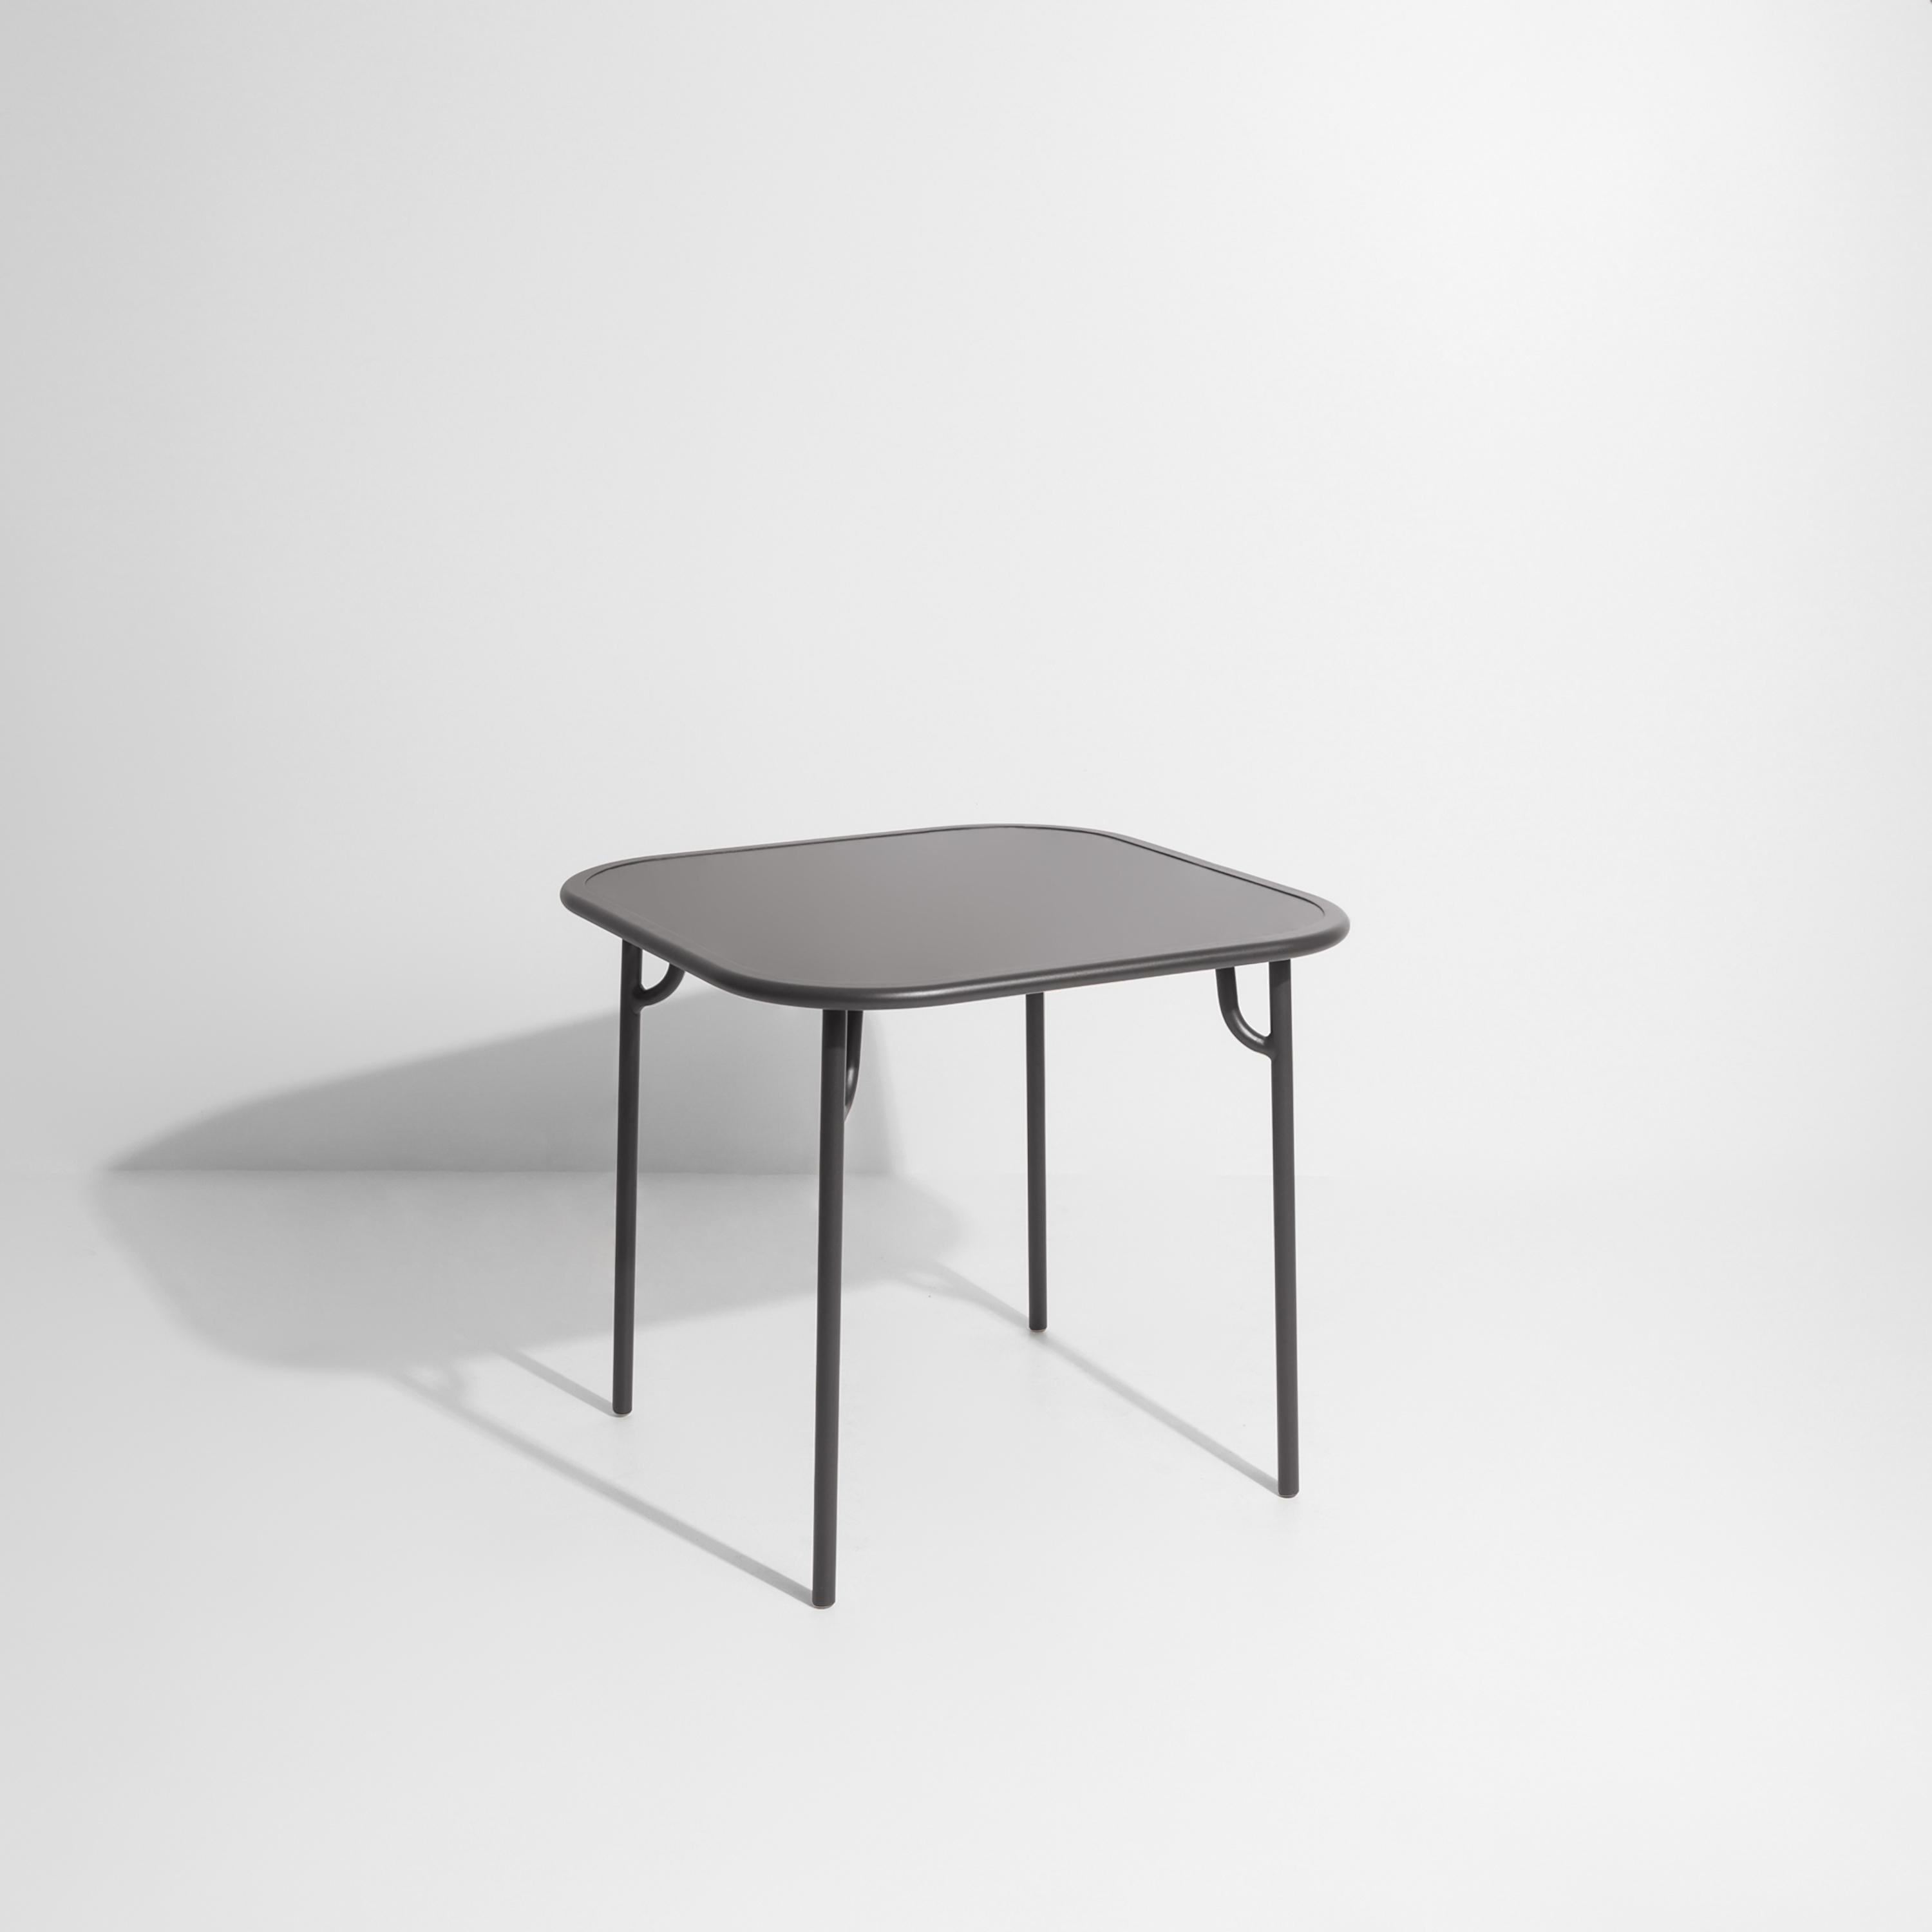 Petite Friture Week-End Plain Square Dining Table in Anthracite Aluminium by Studio BrichetZiegler, 2017

The week-end collection is a full range of outdoor furniture, in aluminium grained epoxy paint, matt finish, that includes 18 functions and 8